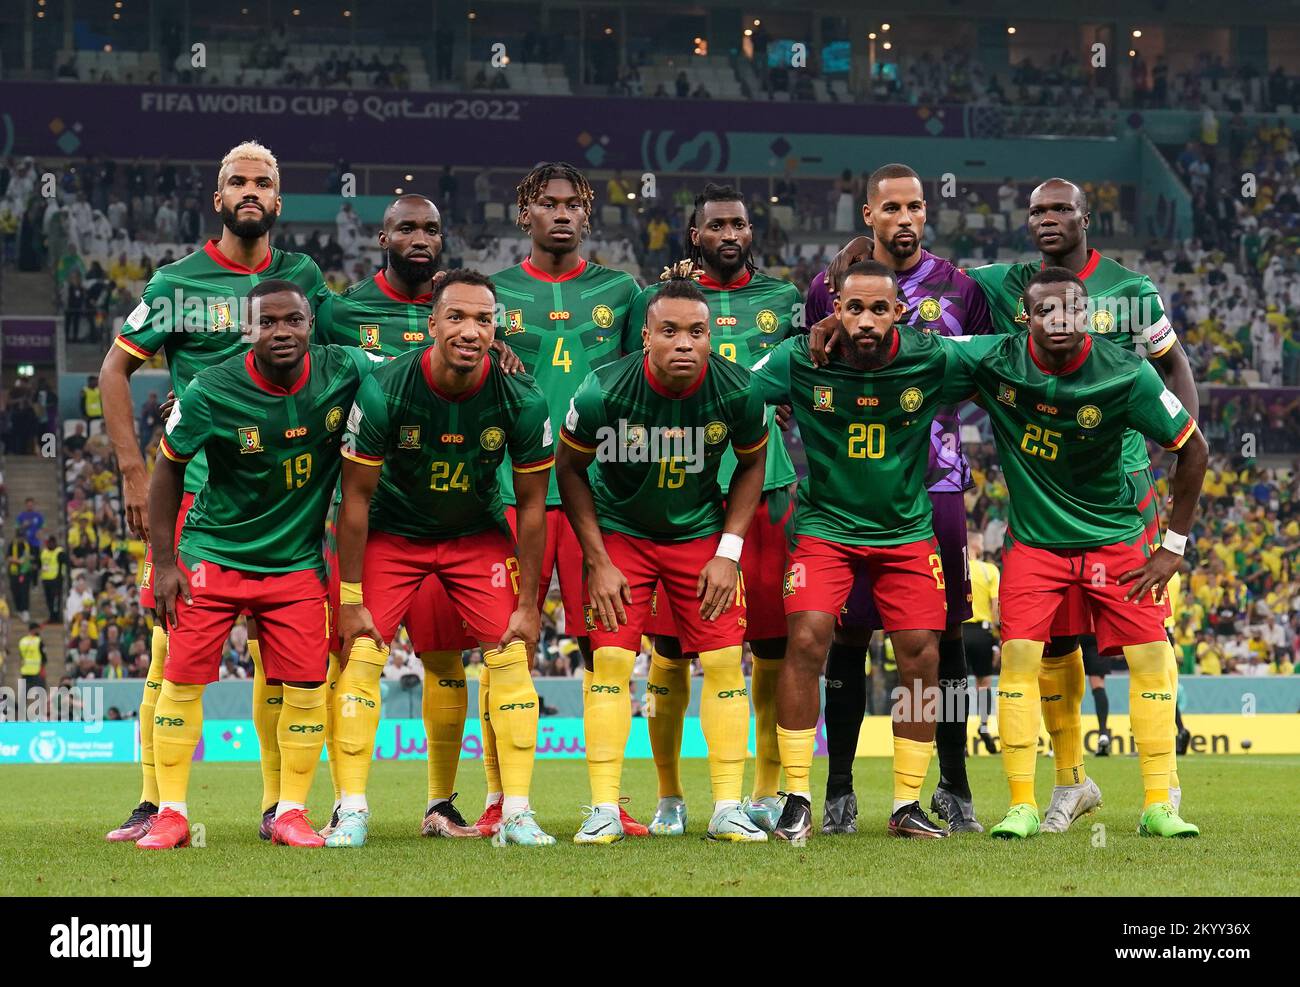 Cameroon team group (top row l-r) Eric Maxim Choupo-Moting, Moumi Ngamaleu, Christopher Wooh, AndrŽ-Frank Zambo Anguissa, goalkeeper Devis Epassy, Vincent Aboubakar (bottom row l-r) Collins Fai, Enzo Ebosse, Pierre Kunde, Bryan Mbeumo, Tolo Nouhou during the FIFA World Cup Group G match at the Lusail Stadium in Lusail, Qatar. Picture date: Friday December 2, 2022. Stock Photo